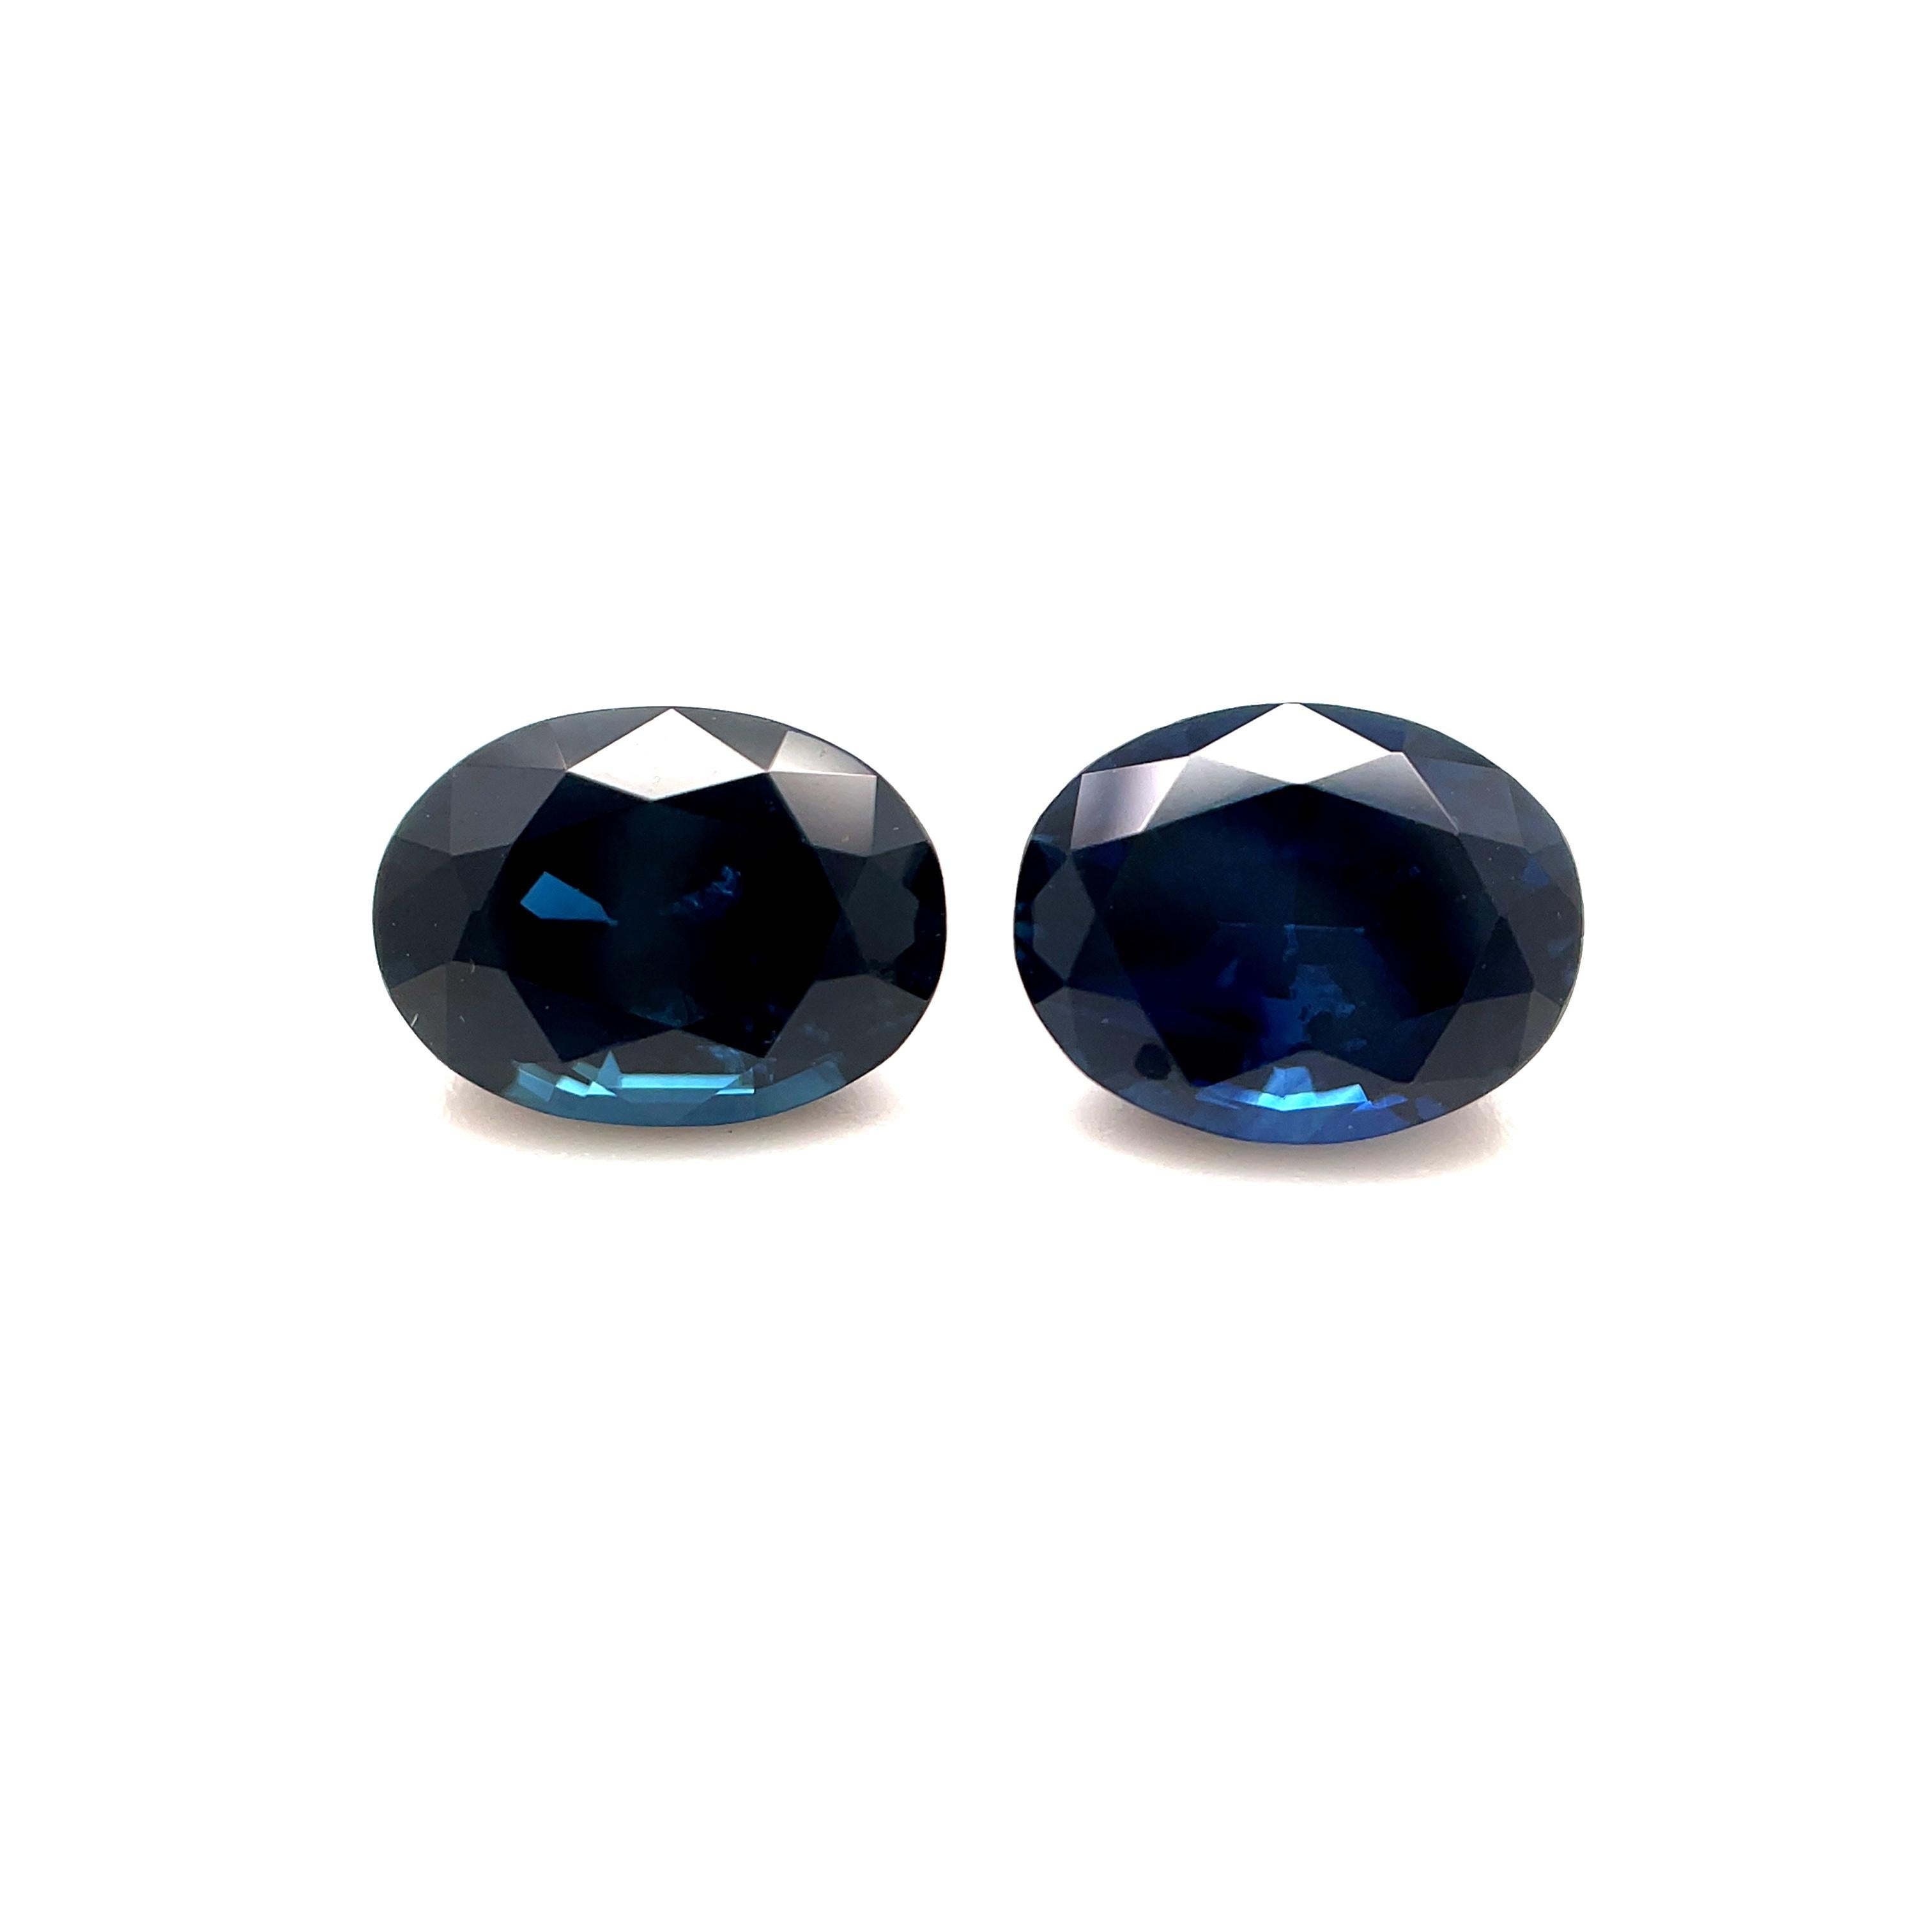 Women's or Men's  Royal Blue Sapphire Pair, 3.82 Carats Total, Loose Gemstones for Earrings For Sale